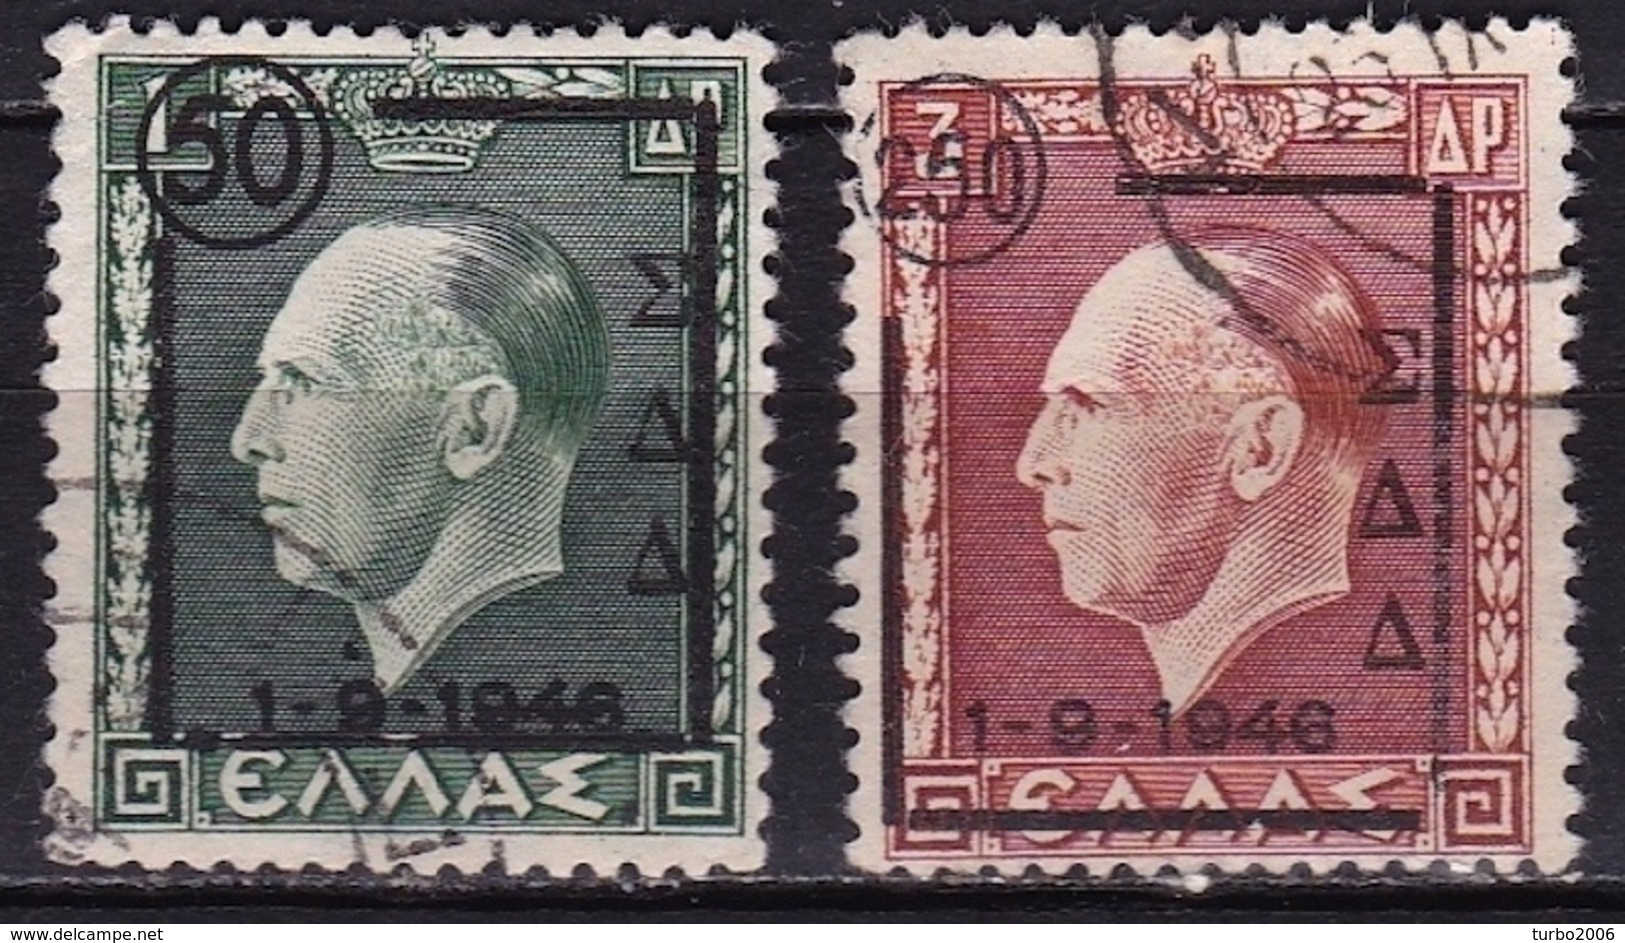 DODECANESE 1947 King George With Overprint Σ.Δ.Δ. And New Value Used Set Vl. 11 / 12.  Vl. 12 With Open Frame Right Down - Dodekanesos